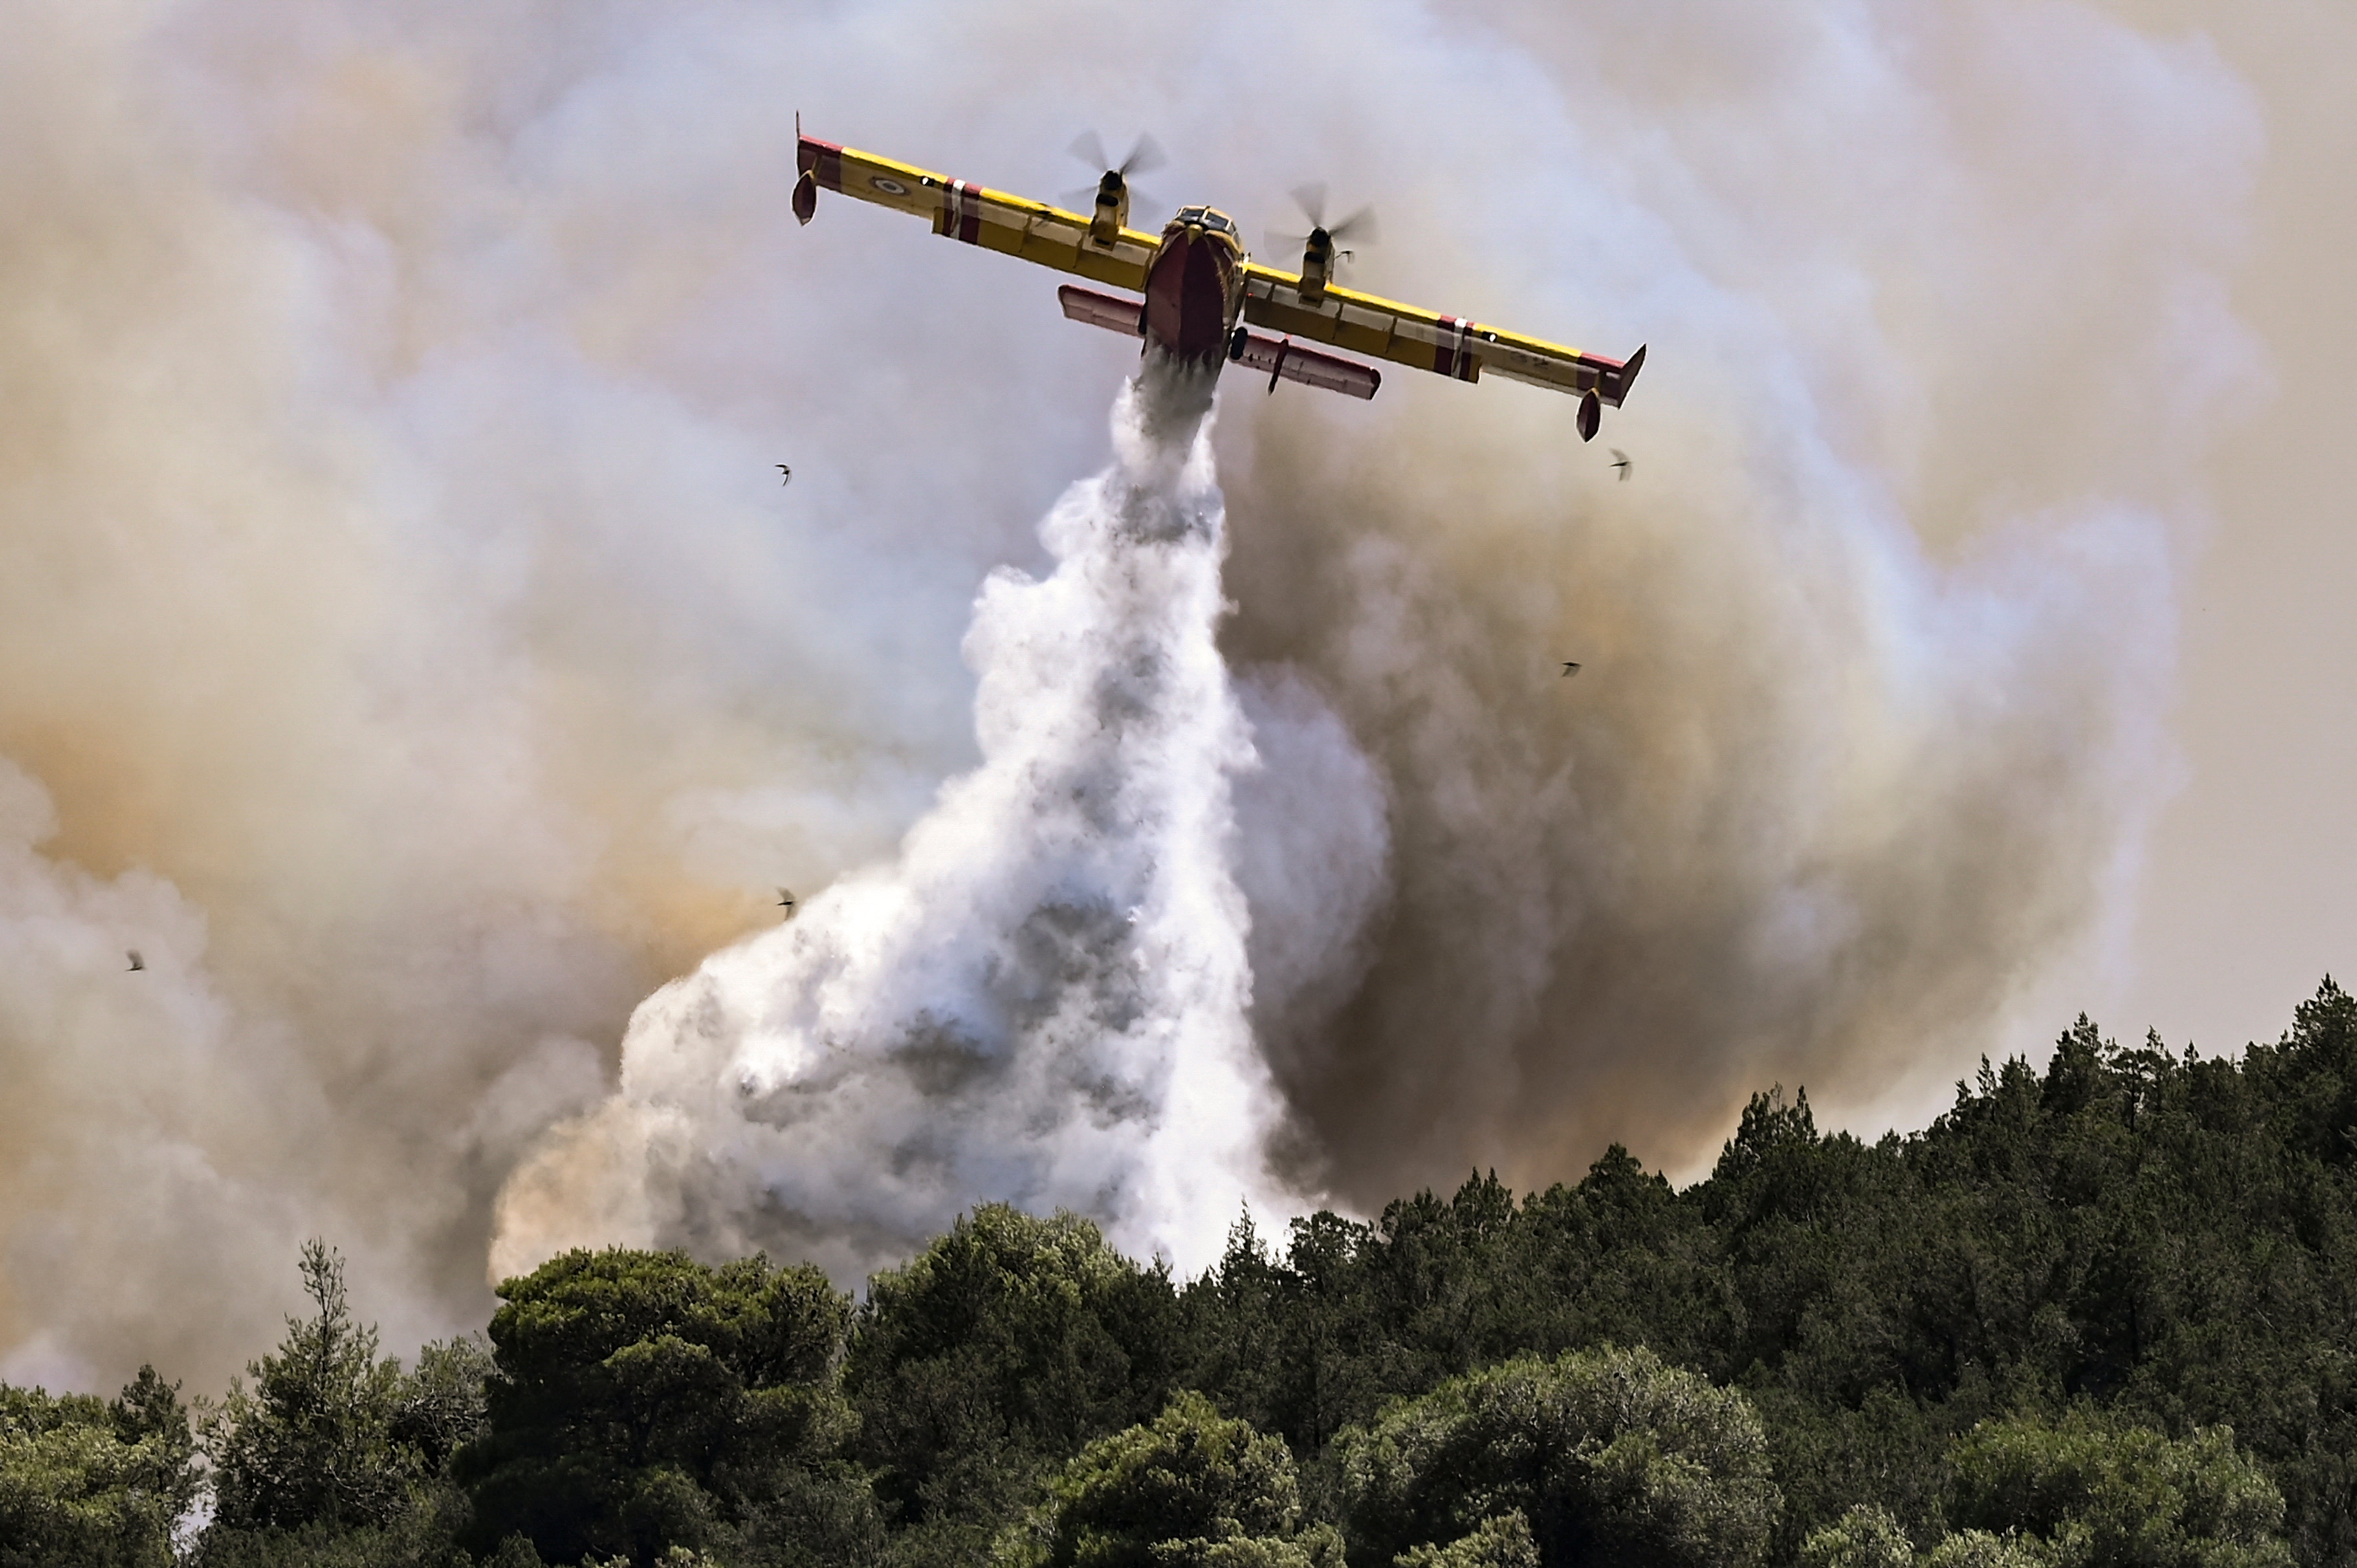 A Canadair firefighting plane sprays water during a fire in Dervenochoria, north-west of Athens